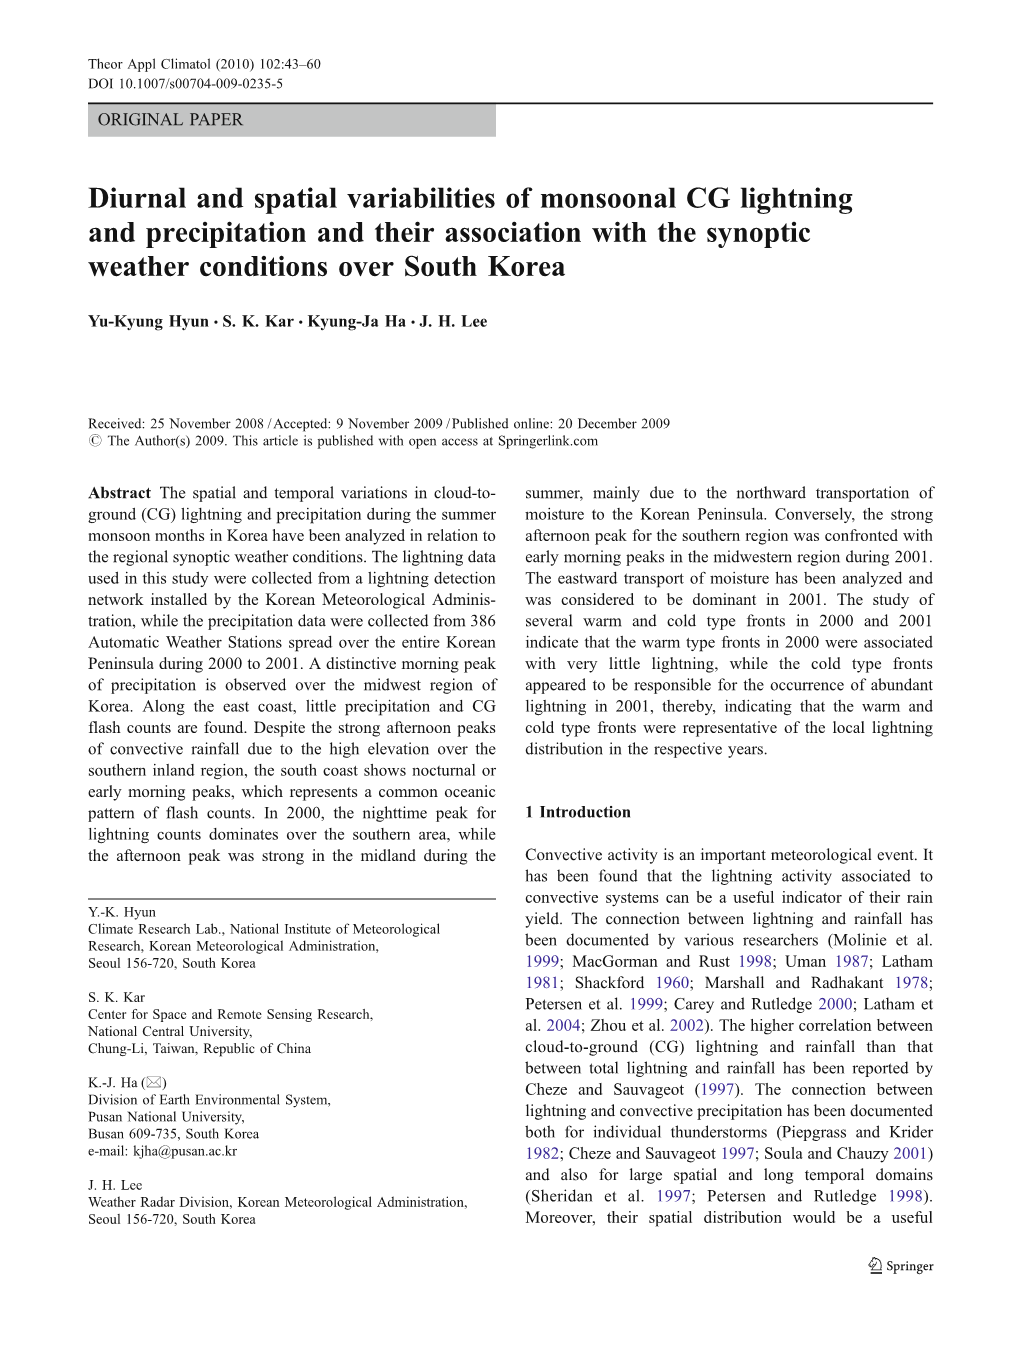 Diurnal and Spatial Variabilities of Monsoonal CG Lightning and Precipitation and Their Association with the Synoptic Weather Conditions Over South Korea